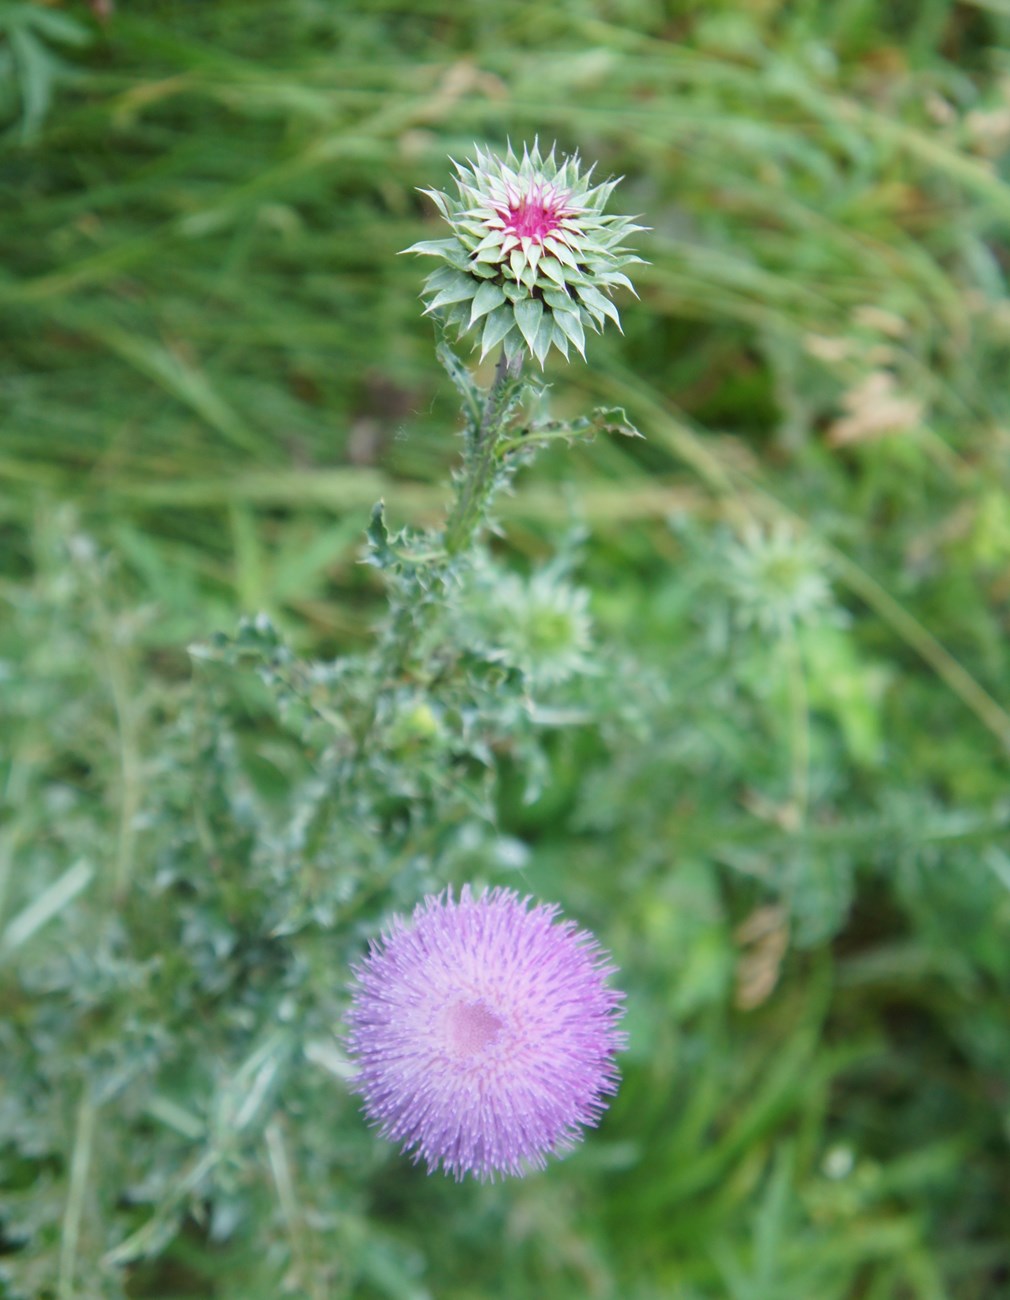 Spiny Plumeless Thistles, one fully bloomed, one not, with spiny ribs on their bloom stalks and purplish pink centers.